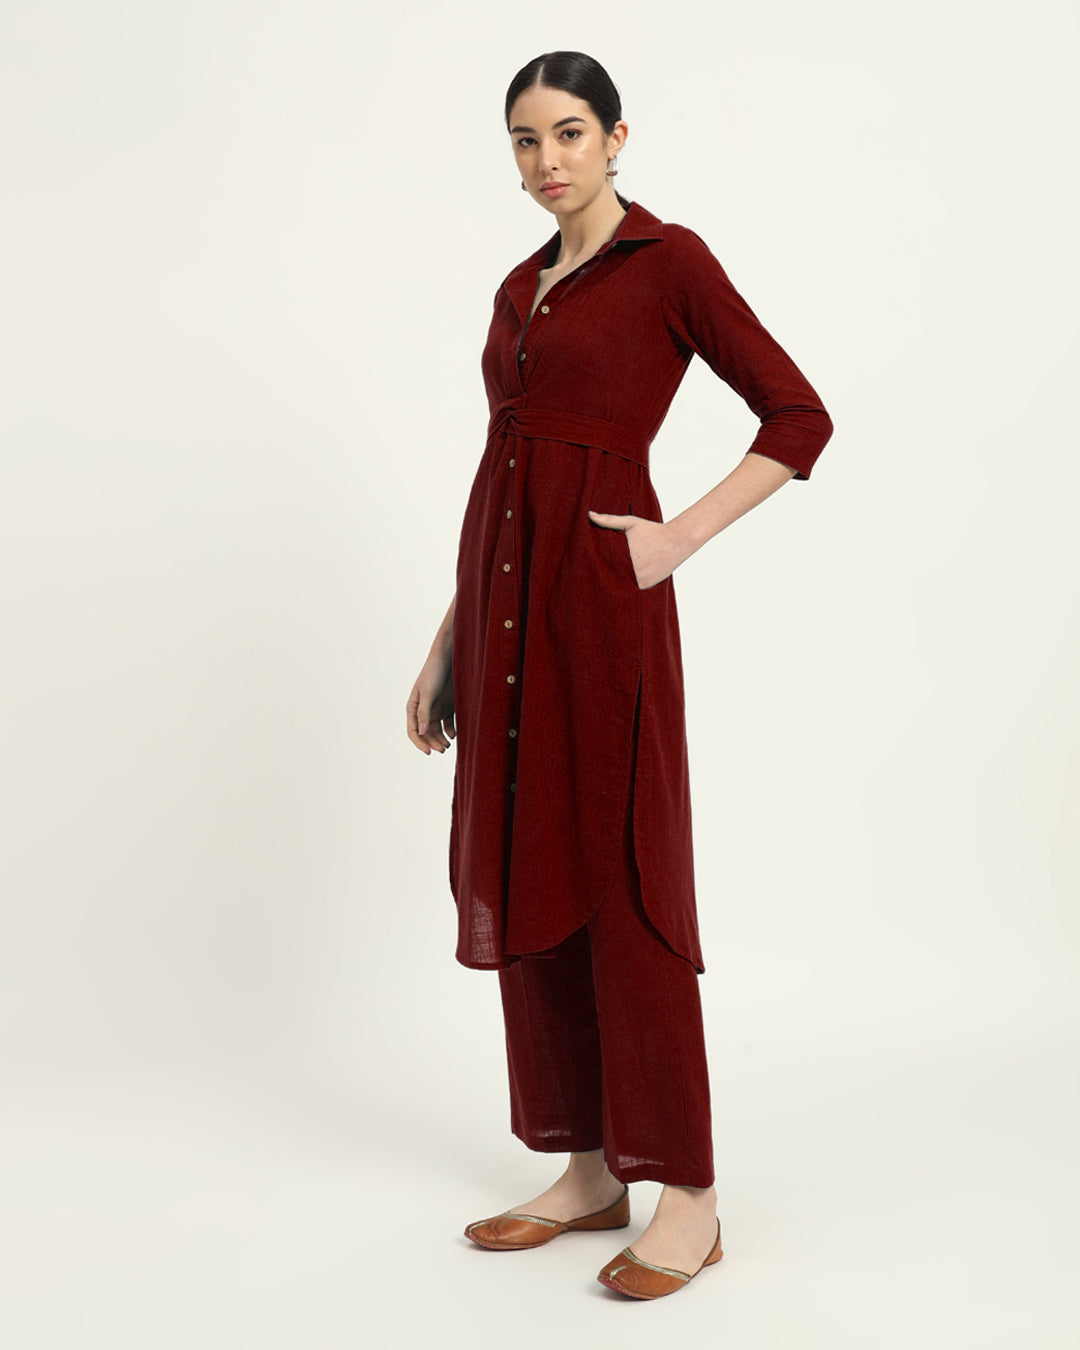 Russet Red Bellisimo Belted Solid Kurta (Without Bottoms)